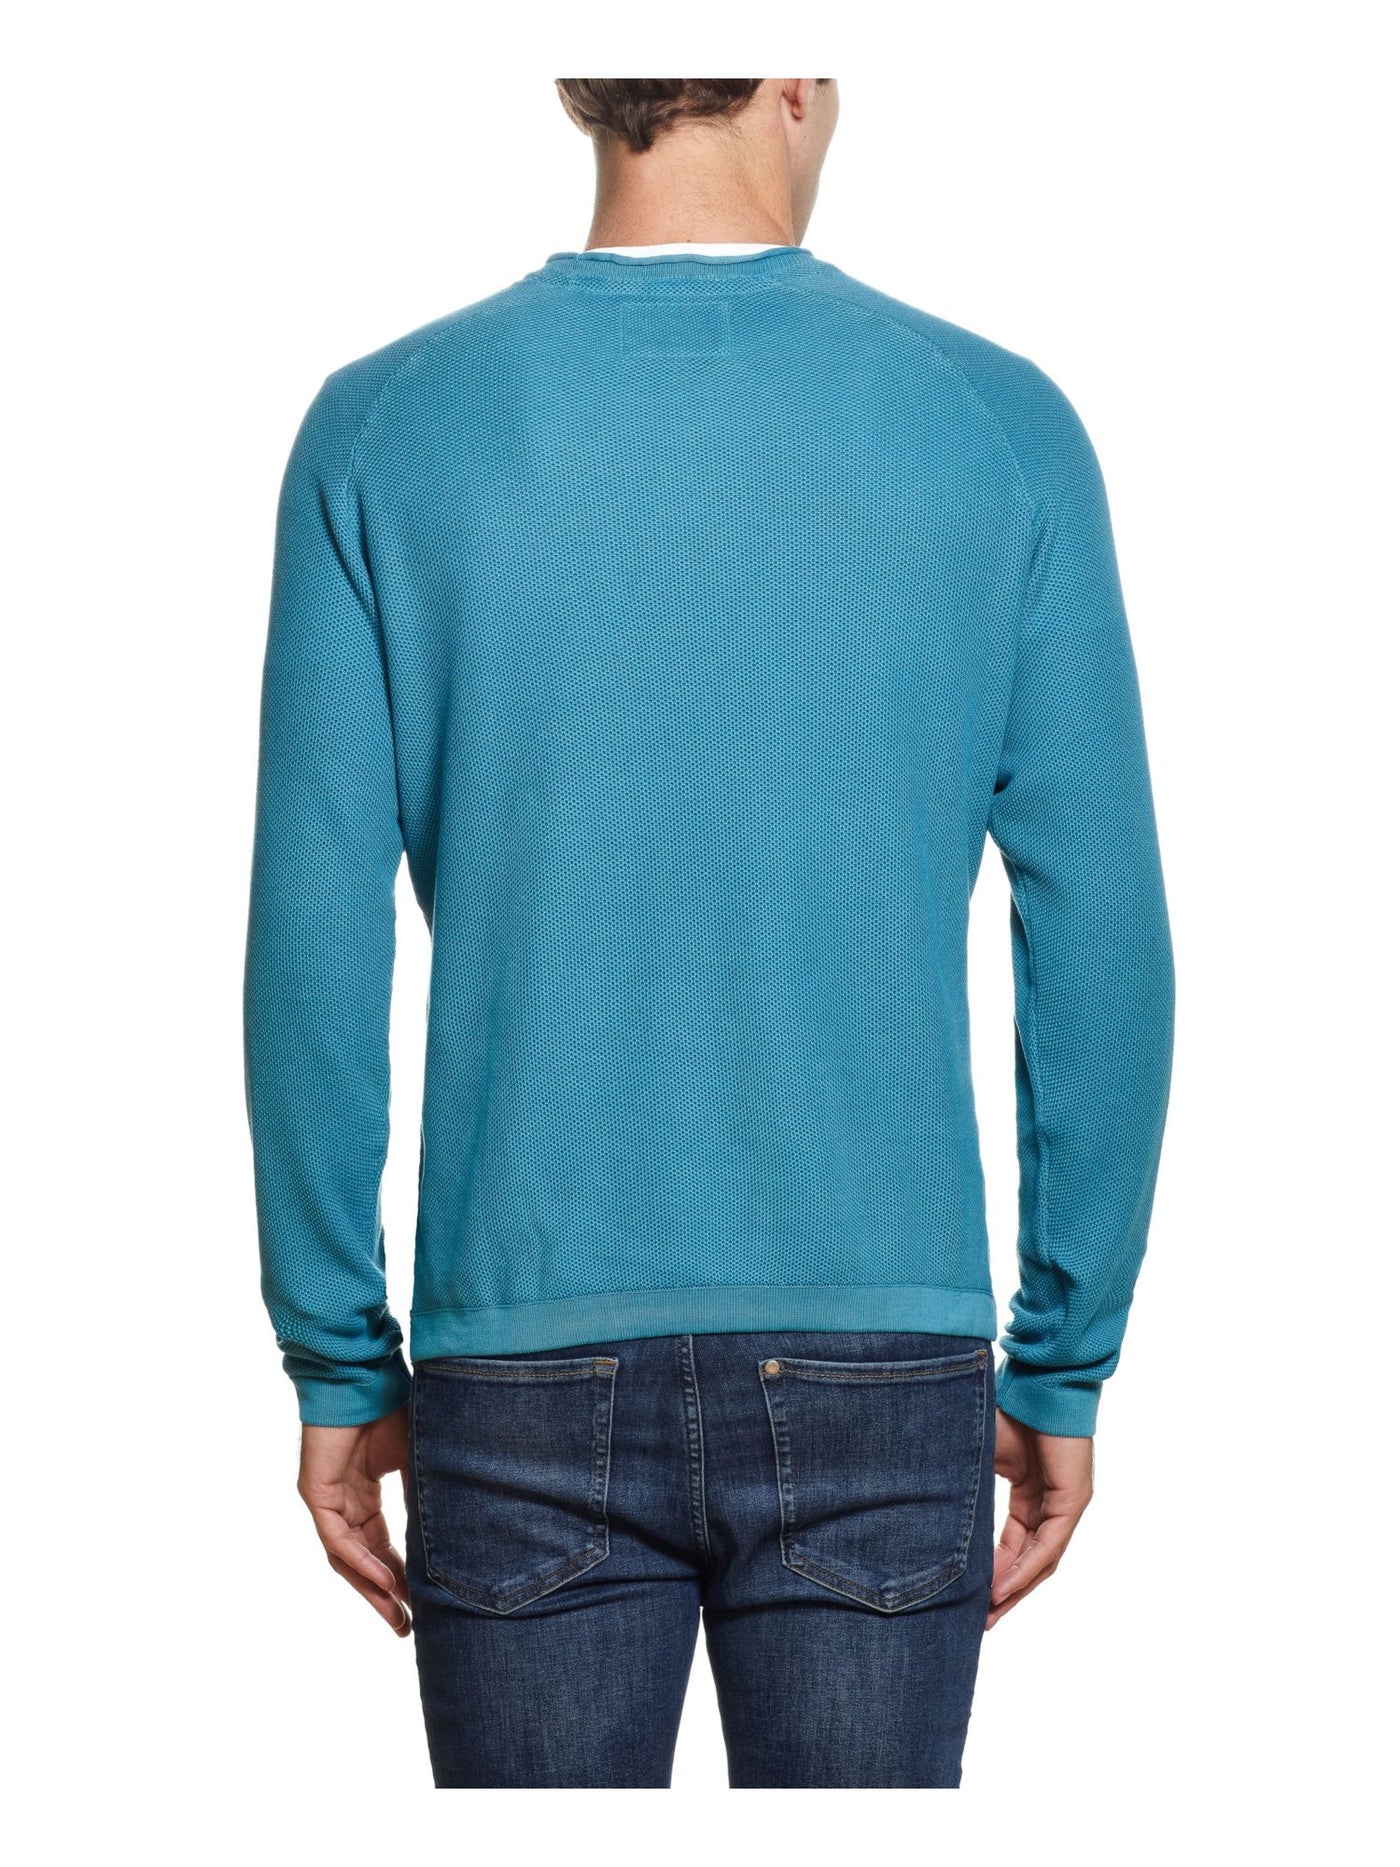 WEATHERPROOF VINTAGE Mens Teal Lightweight, Crew Neck Classic Fit Cotton Pullover Sweater XXL